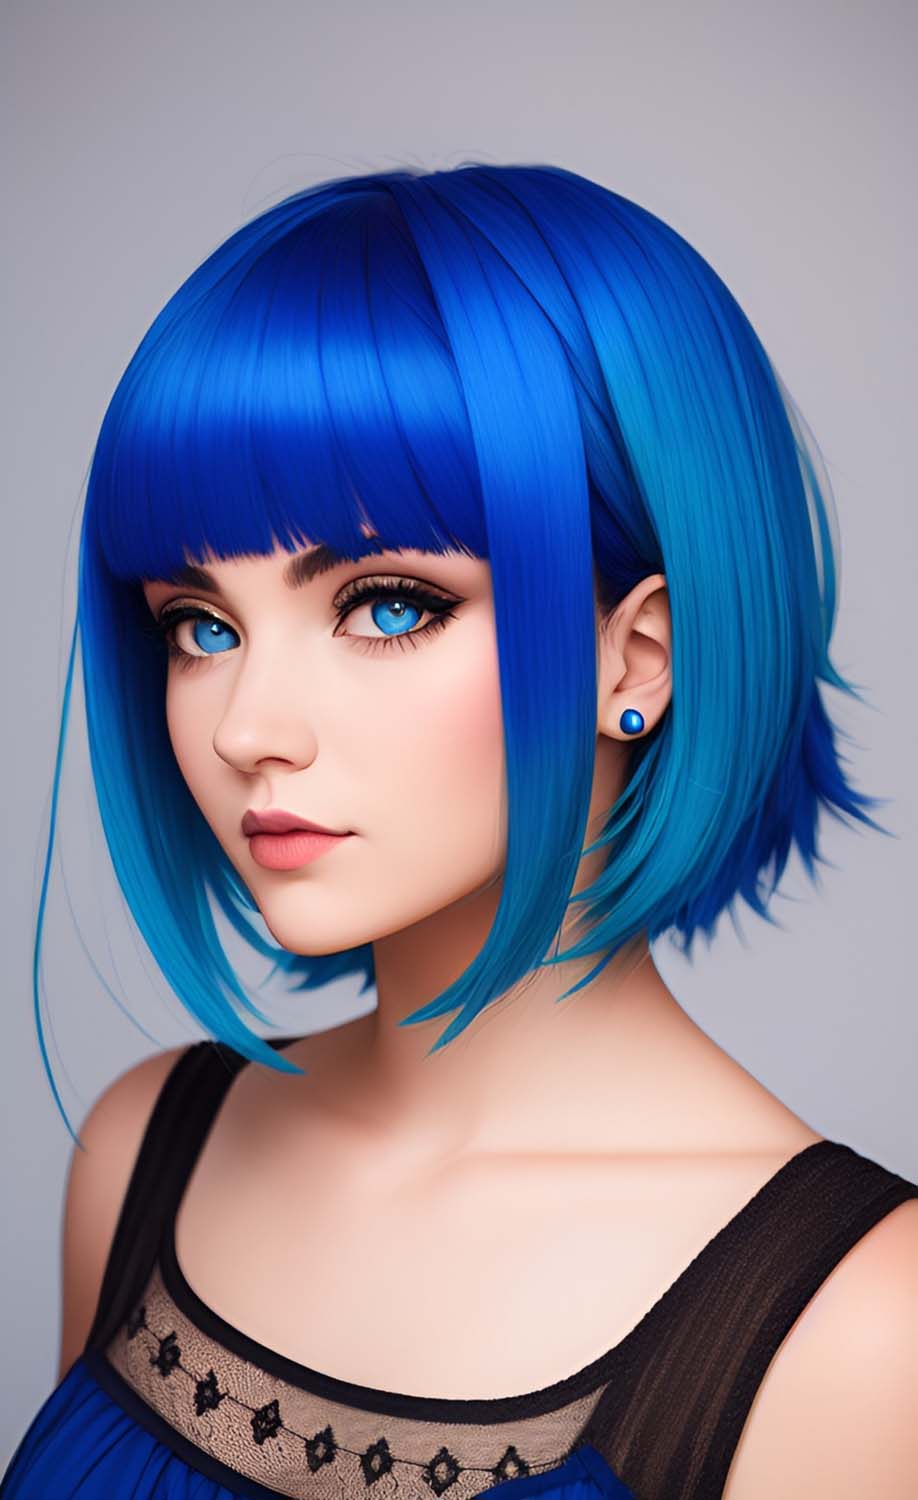 Blue Hairstyle Girl iPhone Wallpaper HD